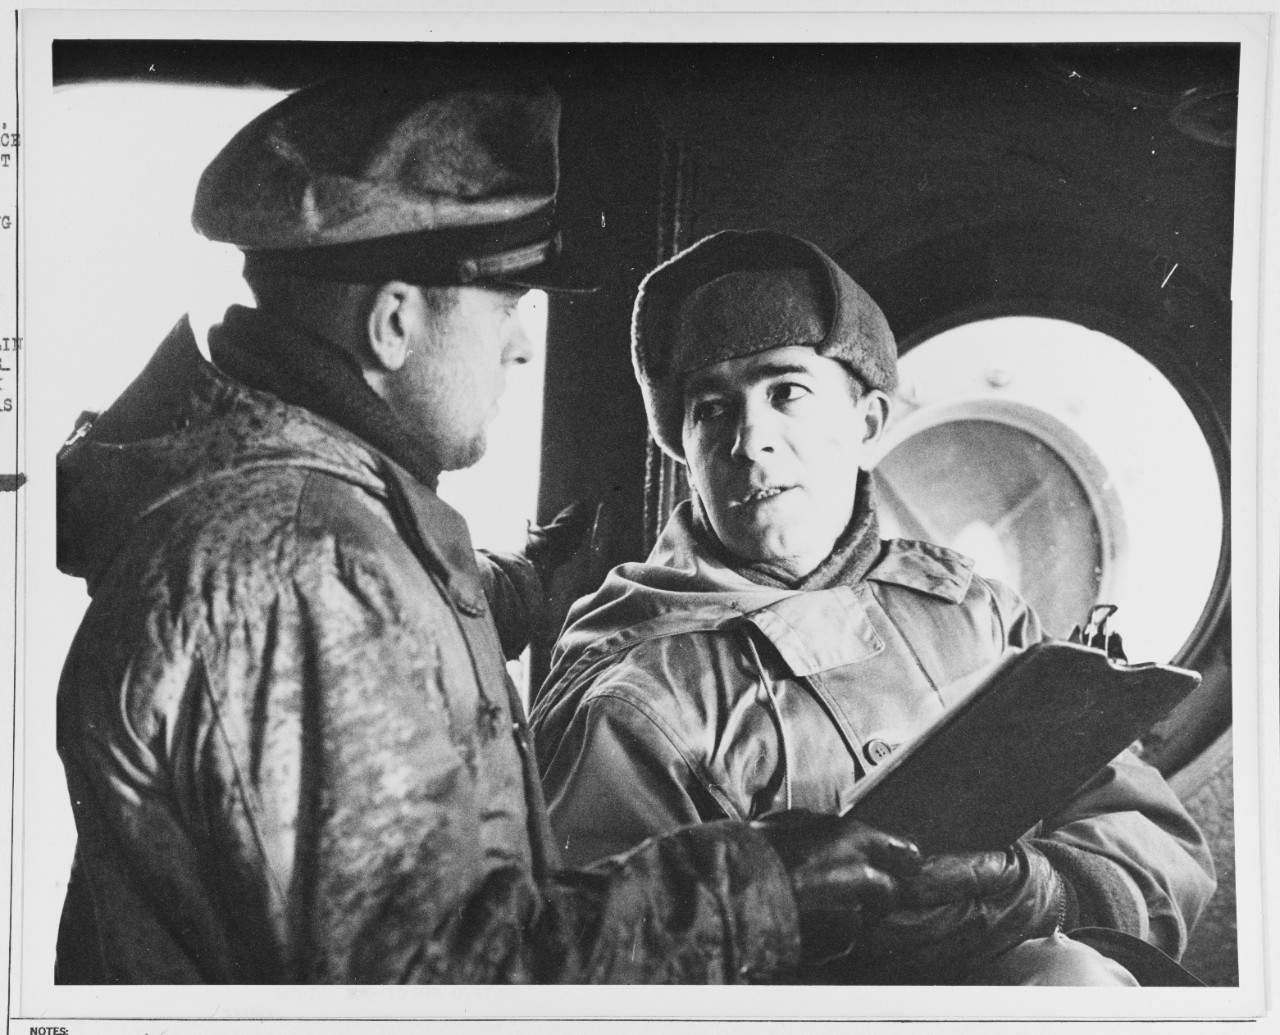 CDR. James A. Hirshfield, USCG, and his signal officer Ensign Barring Coughlin